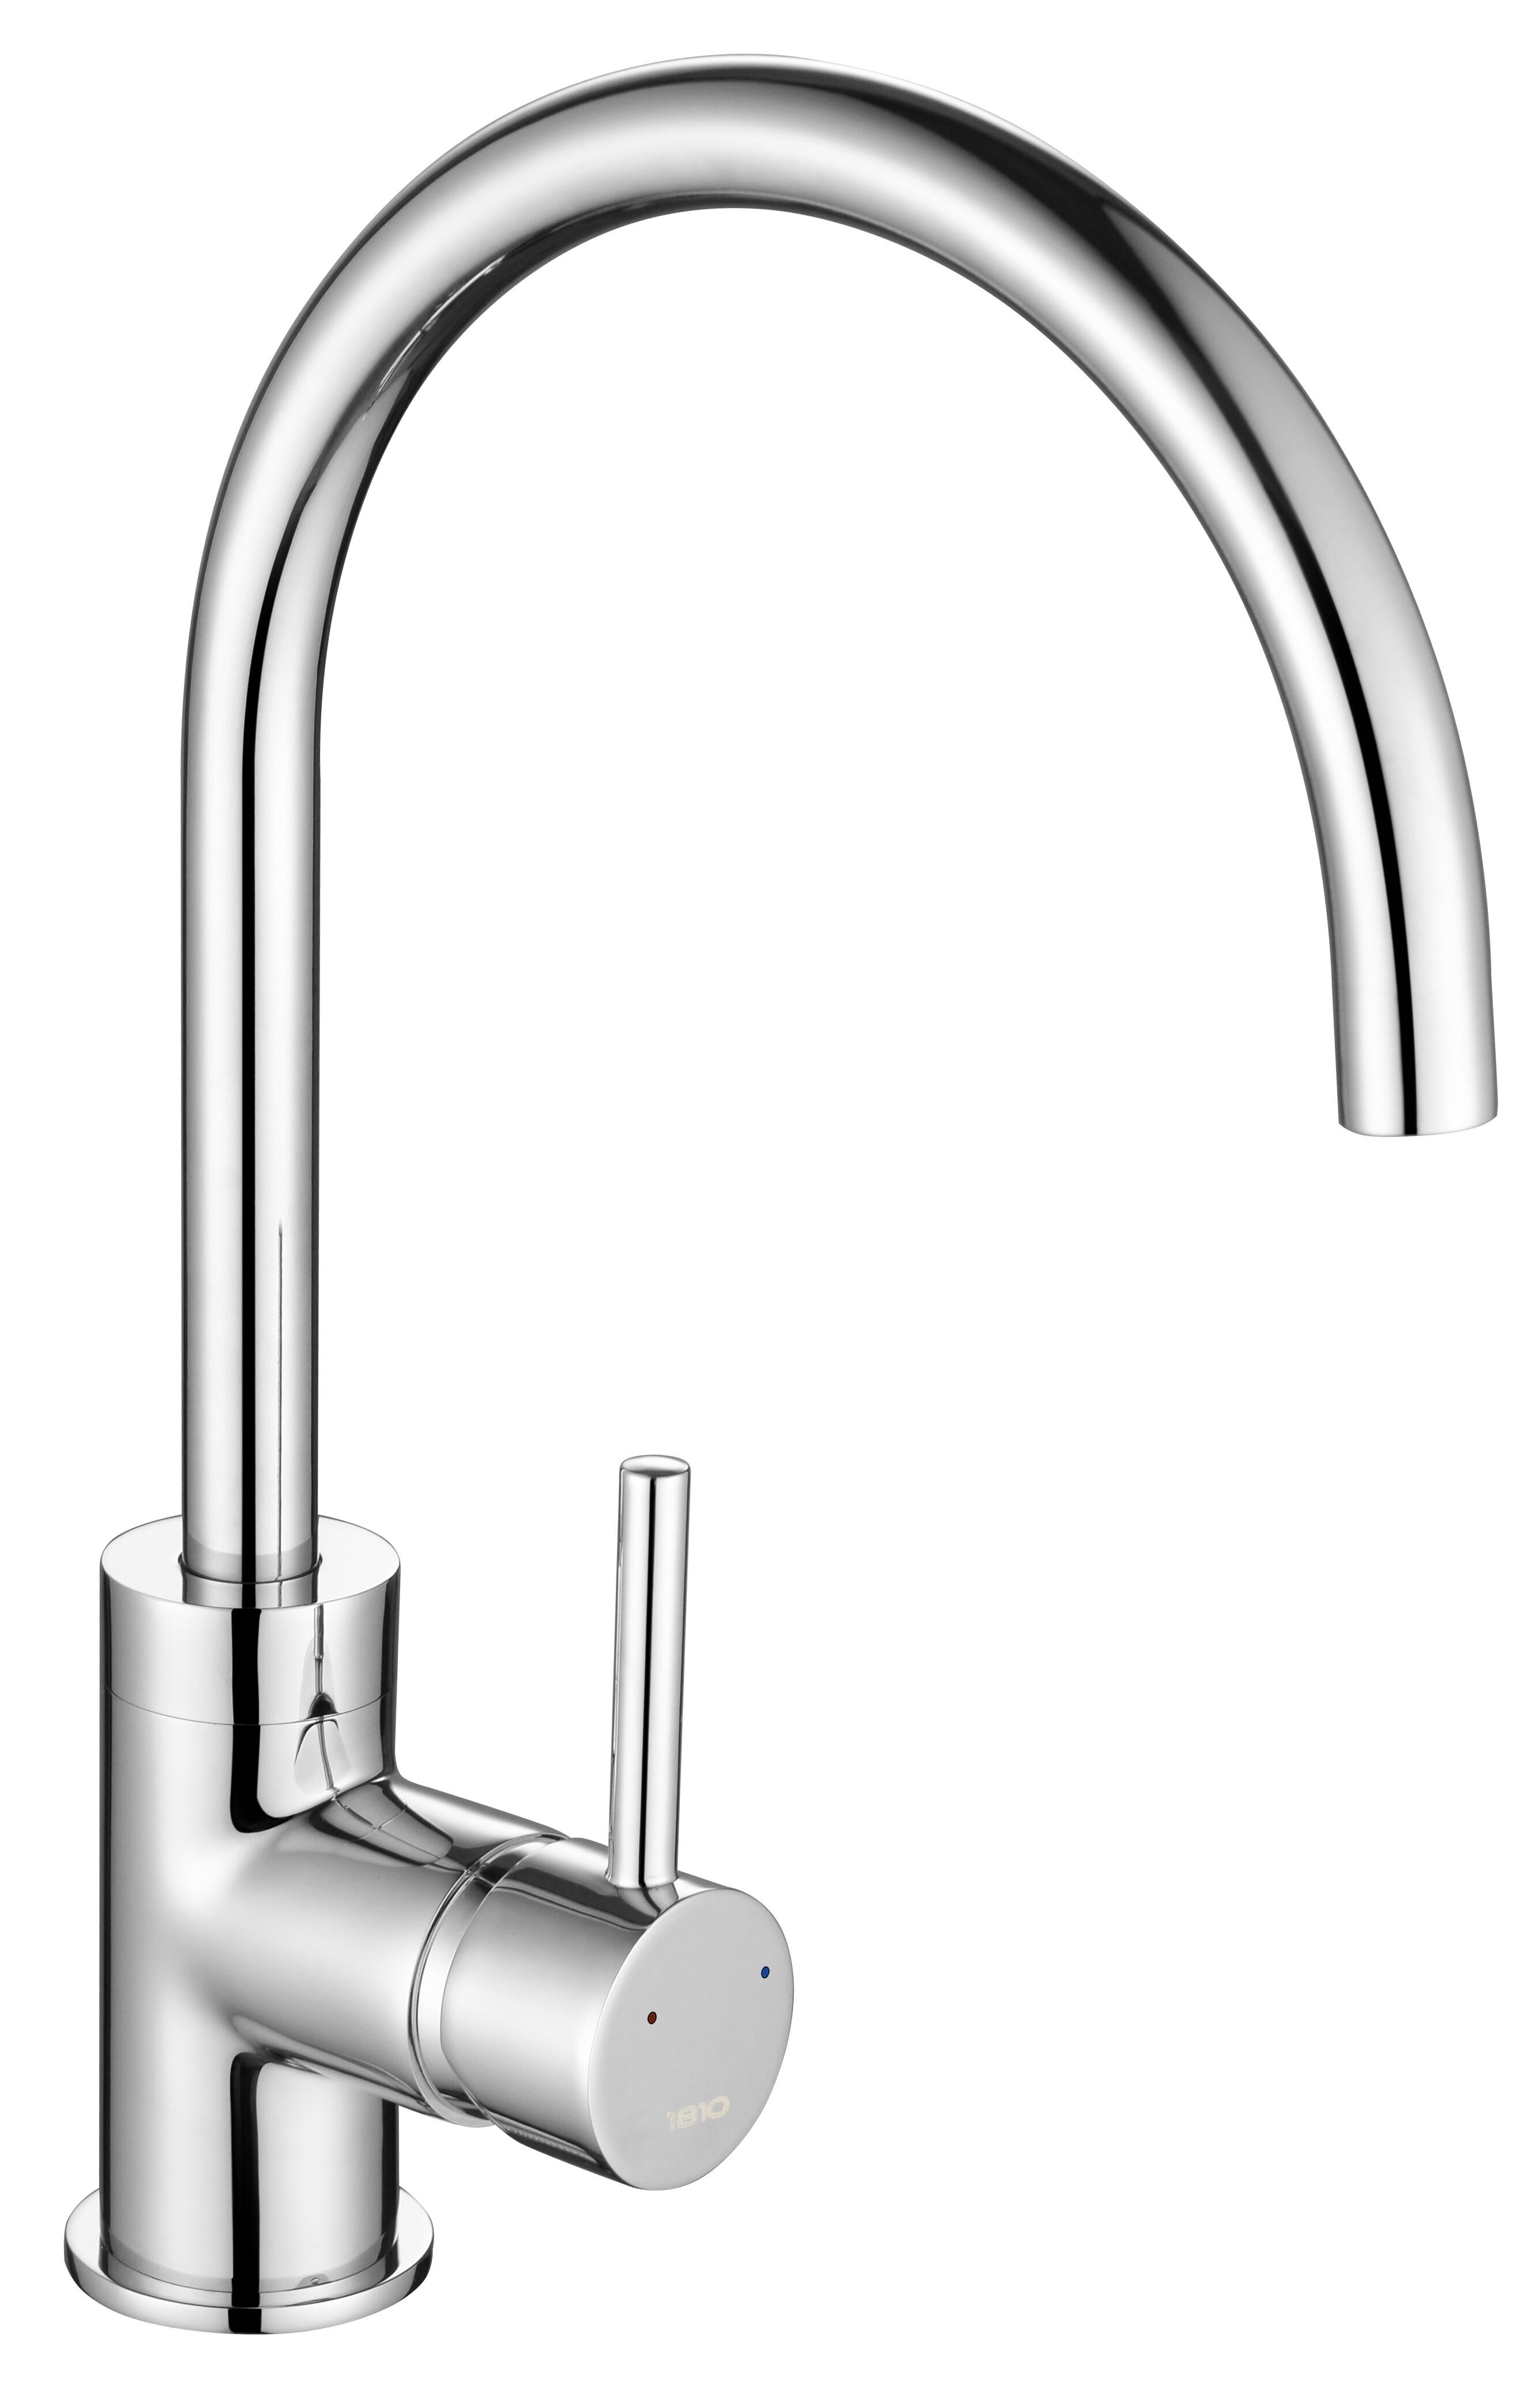 Chrome Courbe Curved Spout Kitchen Tap